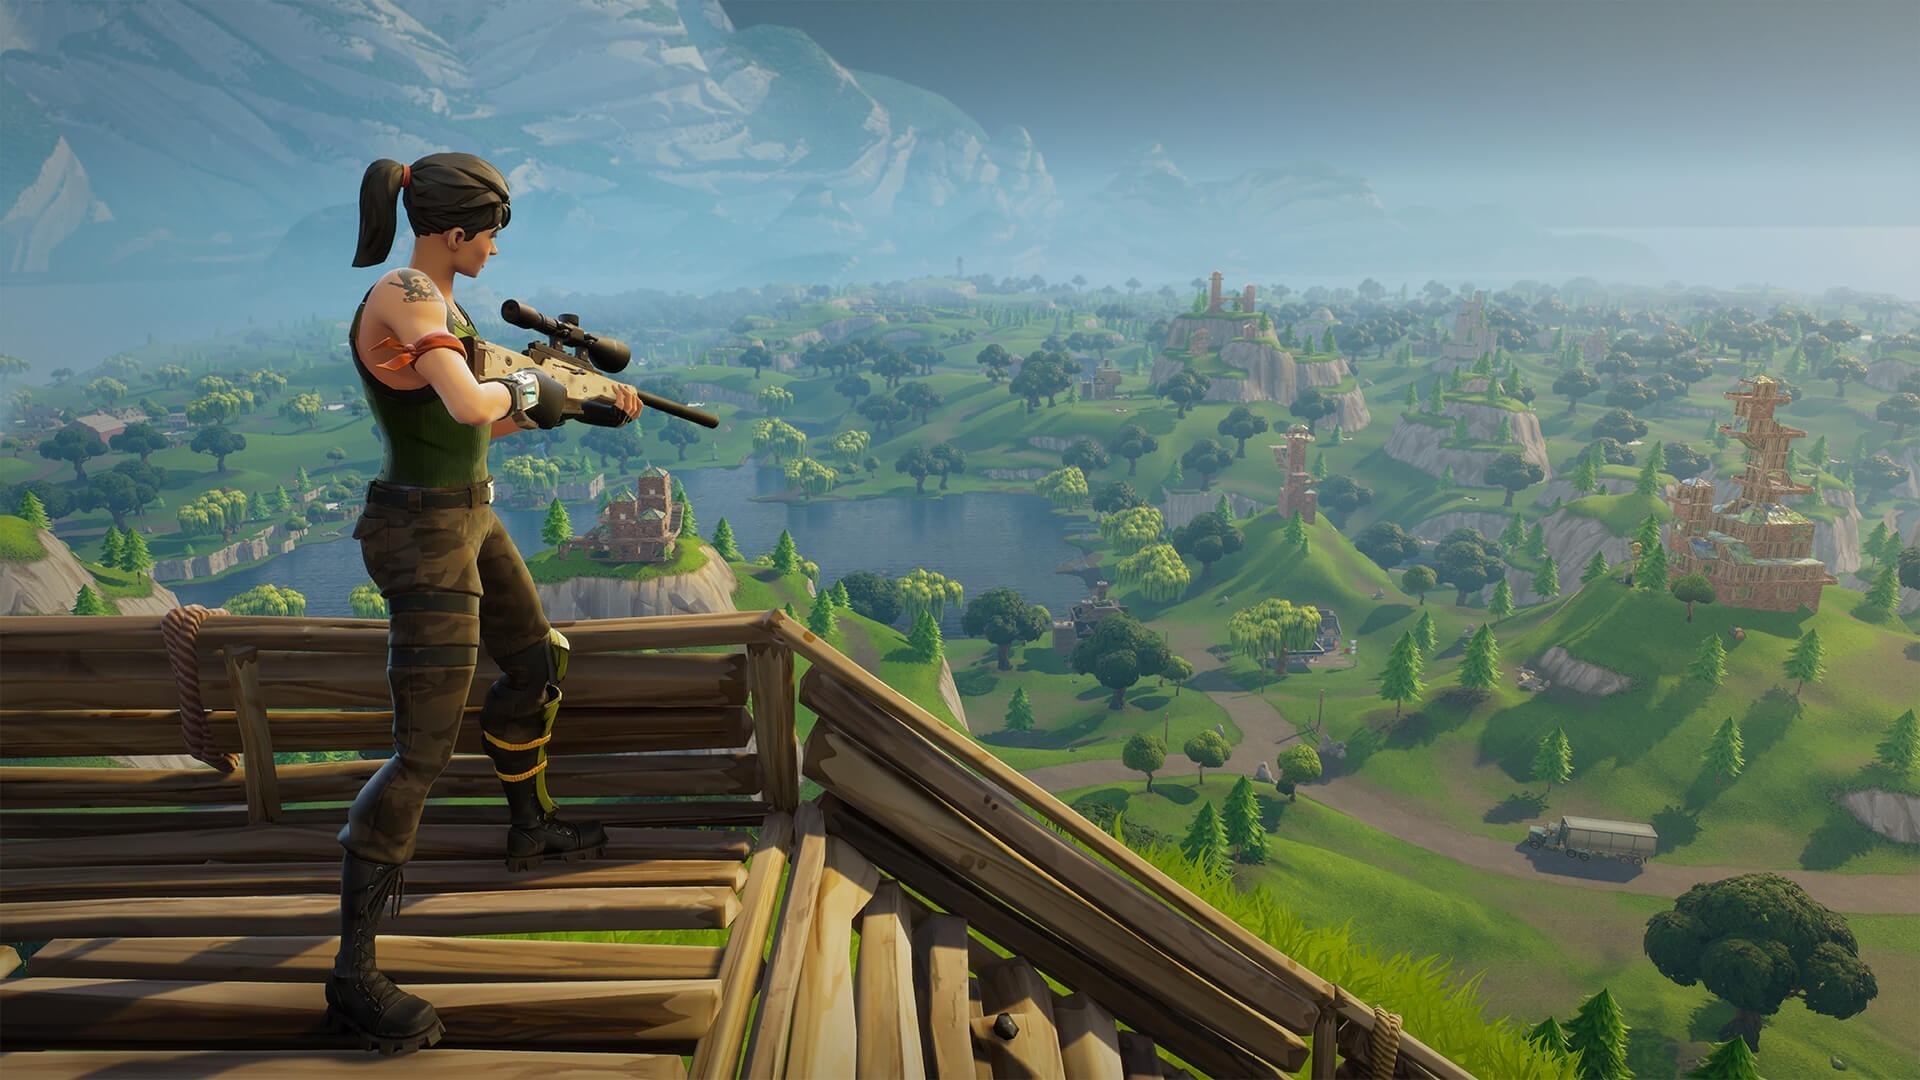 Buy Fortnite The Iris Pack Xbox One Compare Prices